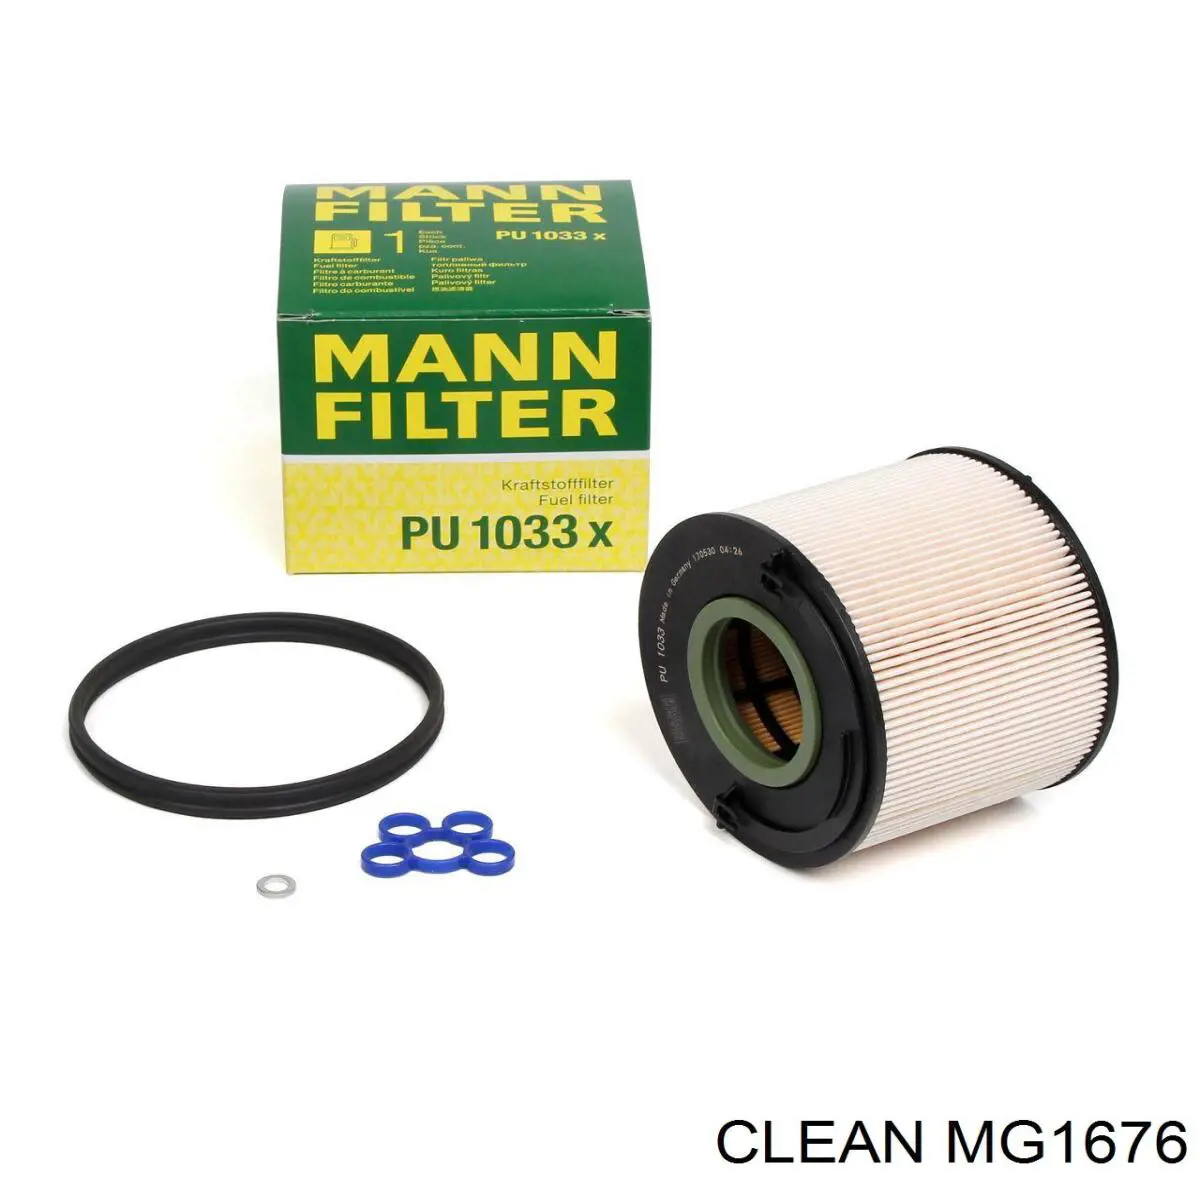 MG1676 Clean filtro combustible